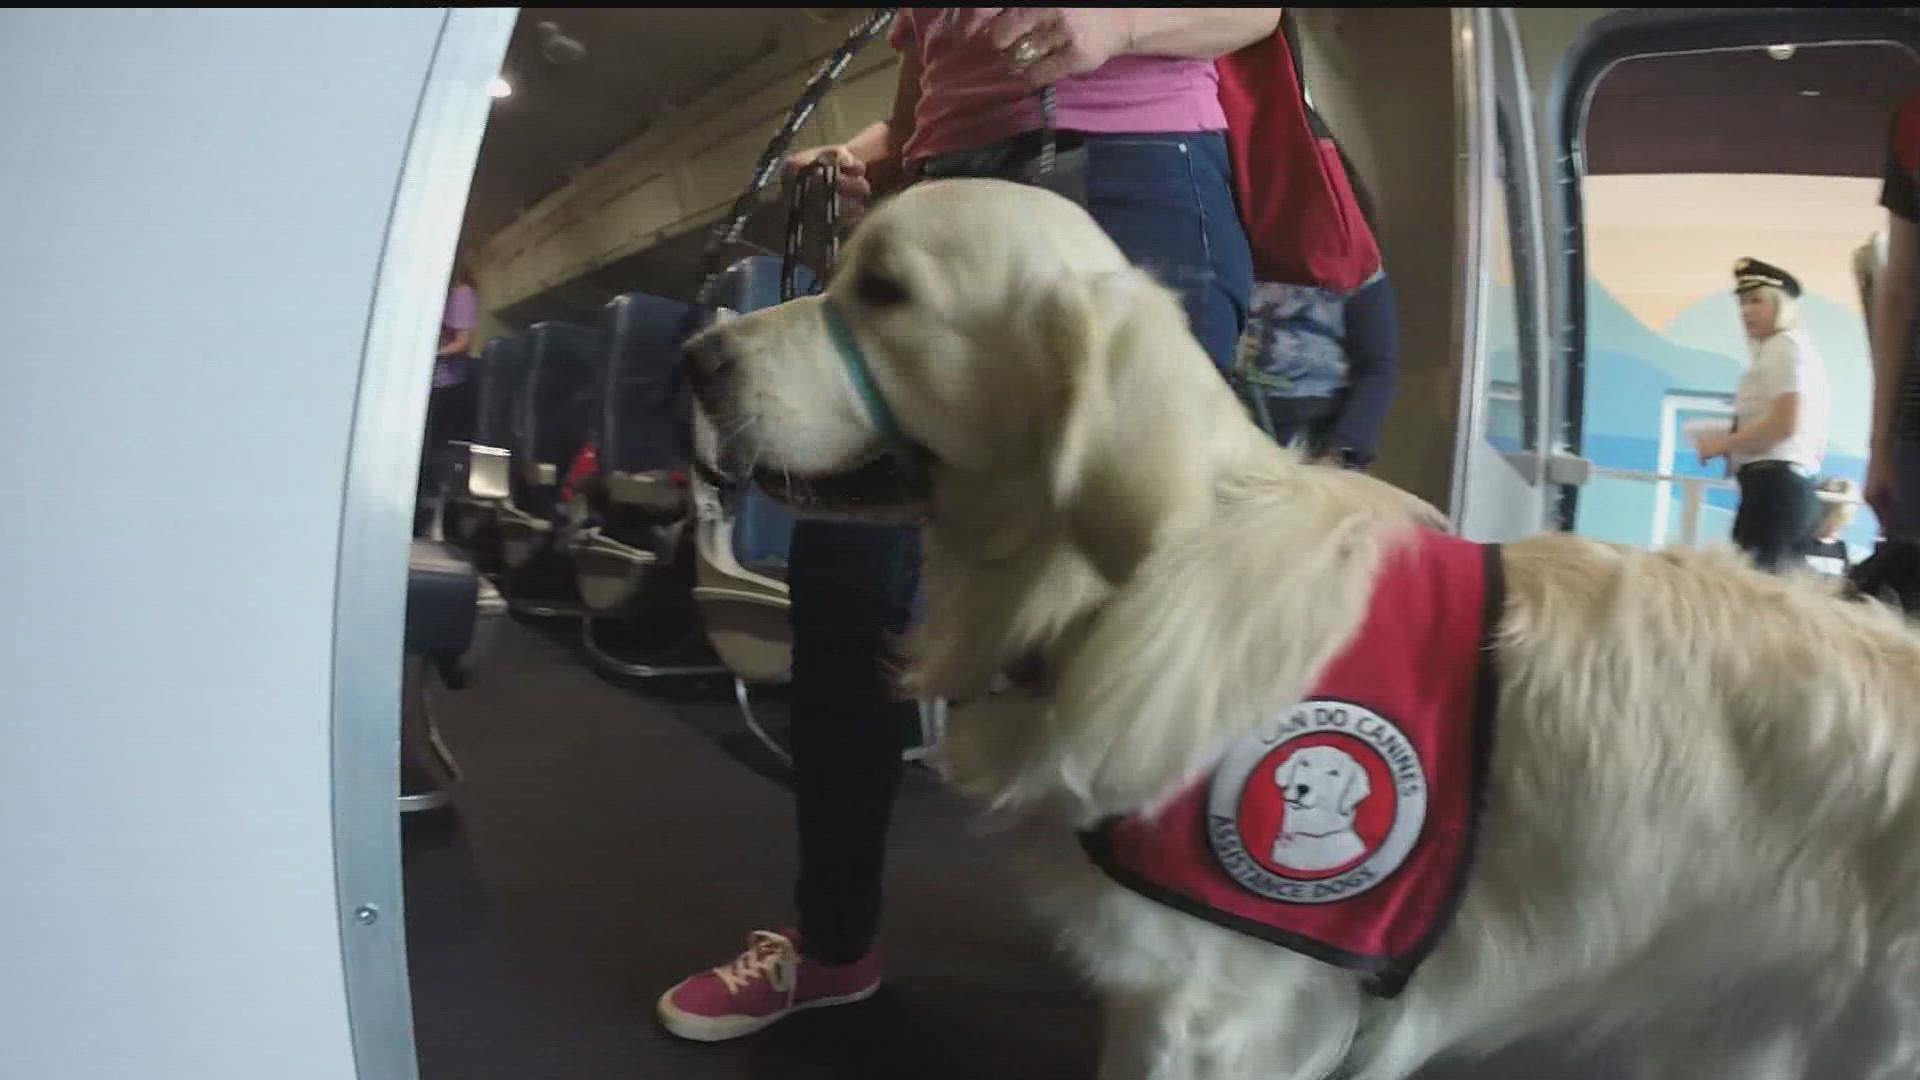 The "flight to nowhere" allows future assistance animals to walk through the airport, go through security and get on a mock plane at an airport training facility.